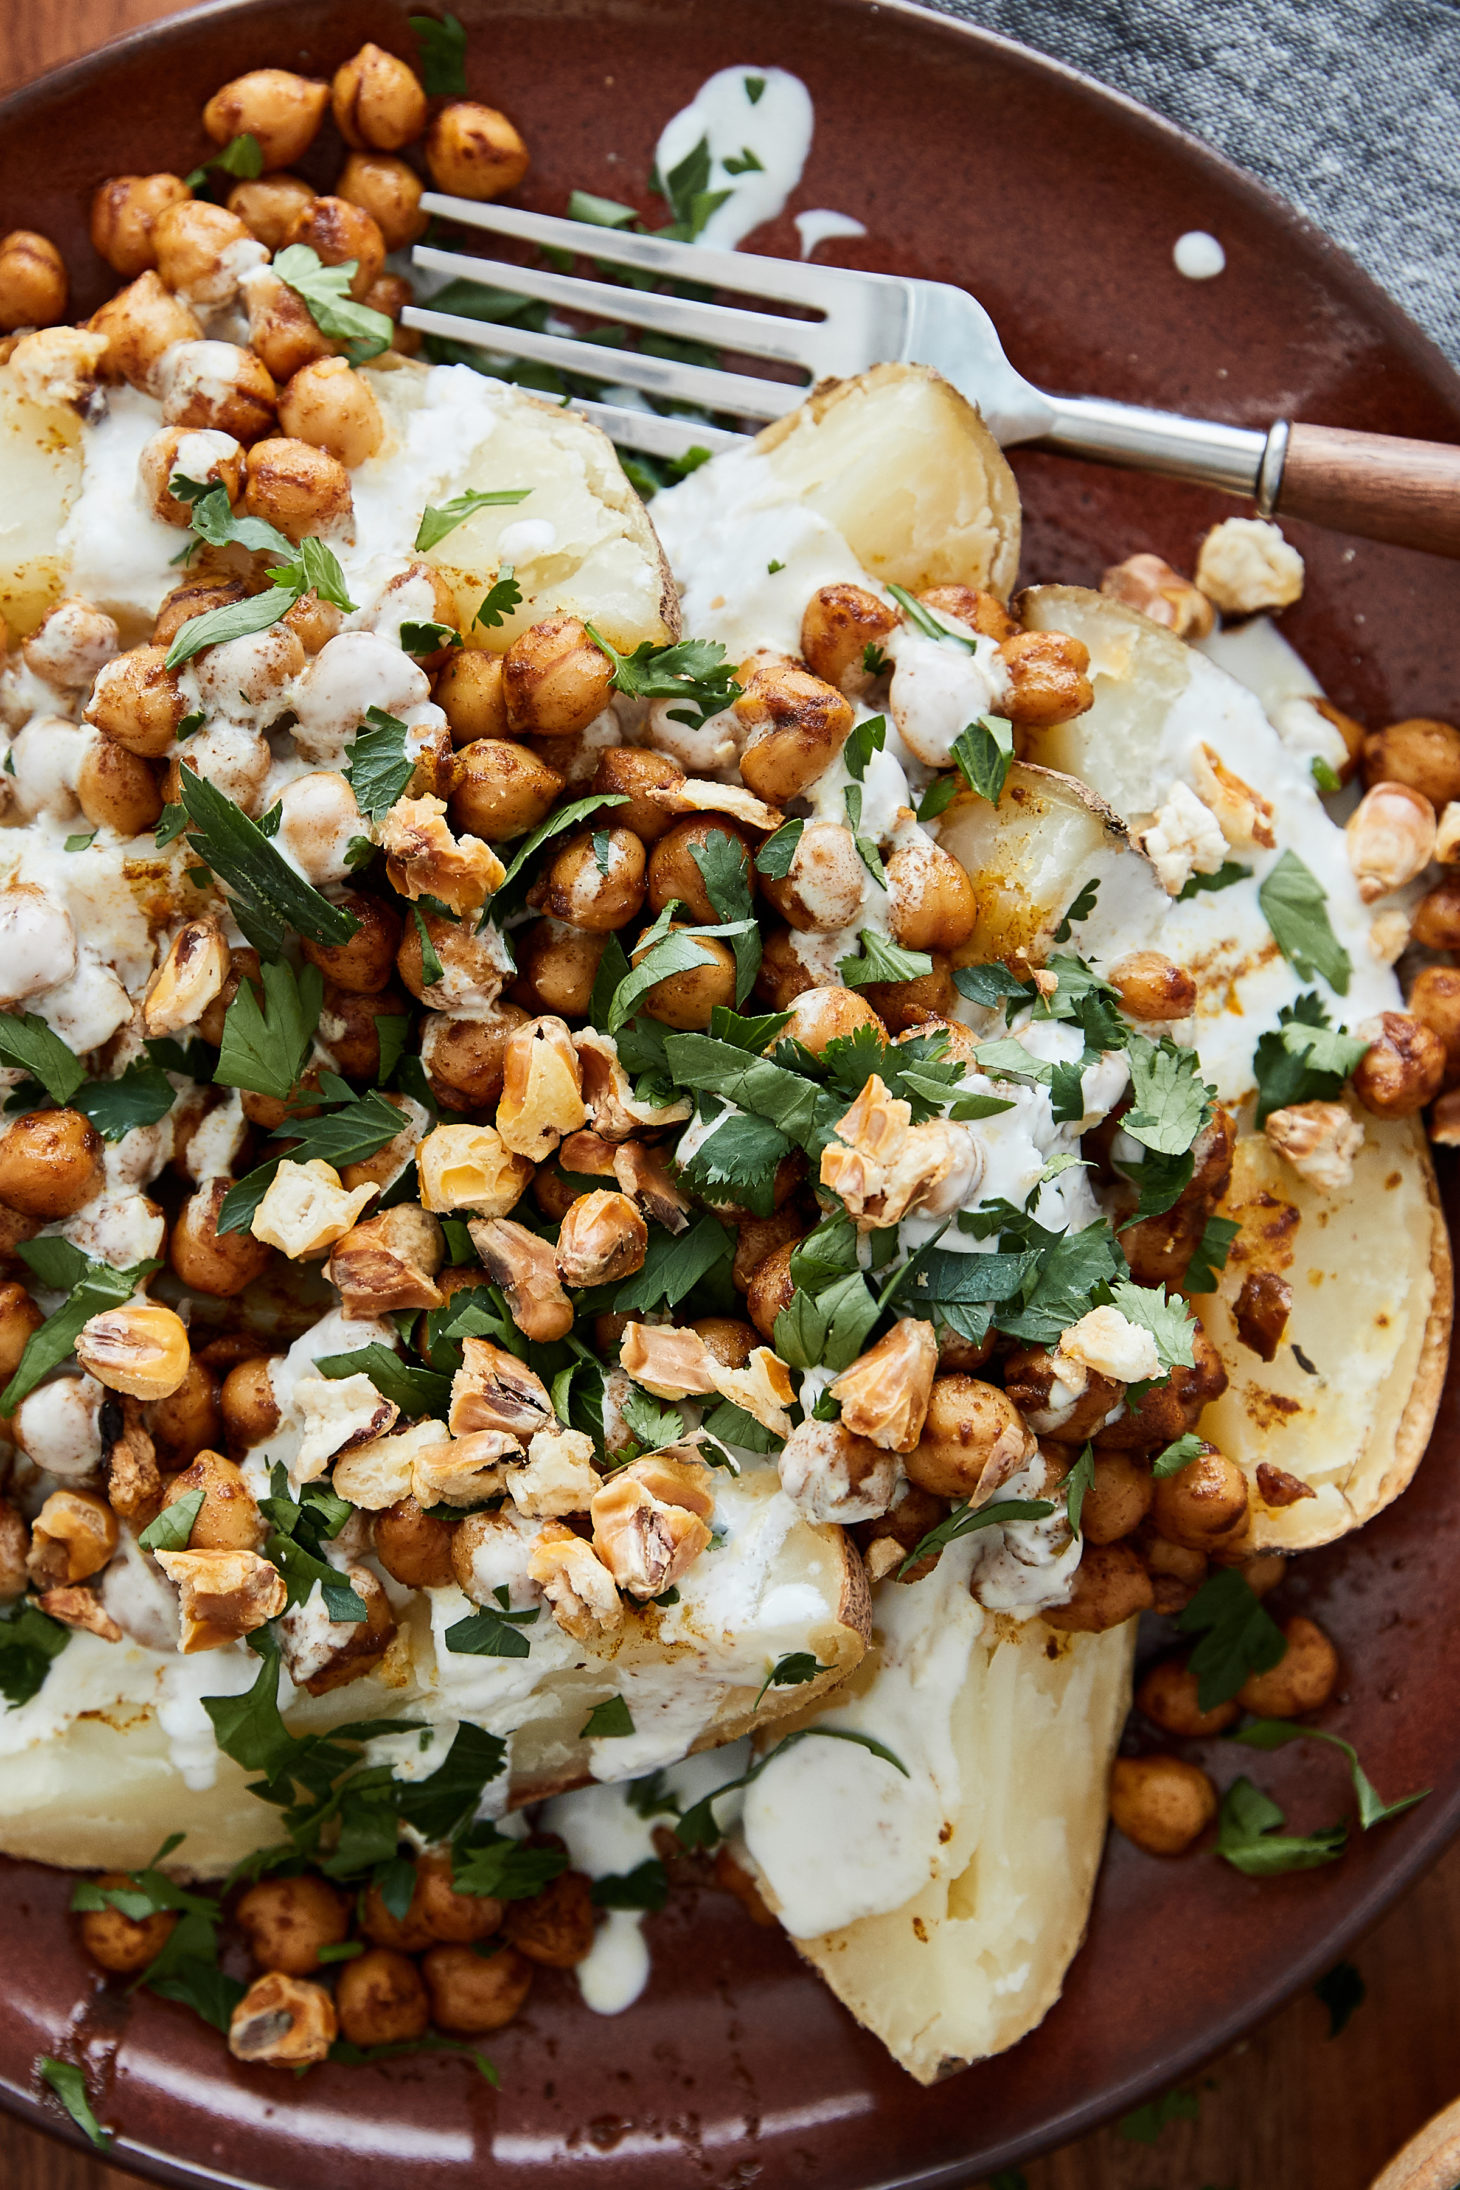 Loaded Potatoes with Spiced Chickpeas and Yogurt